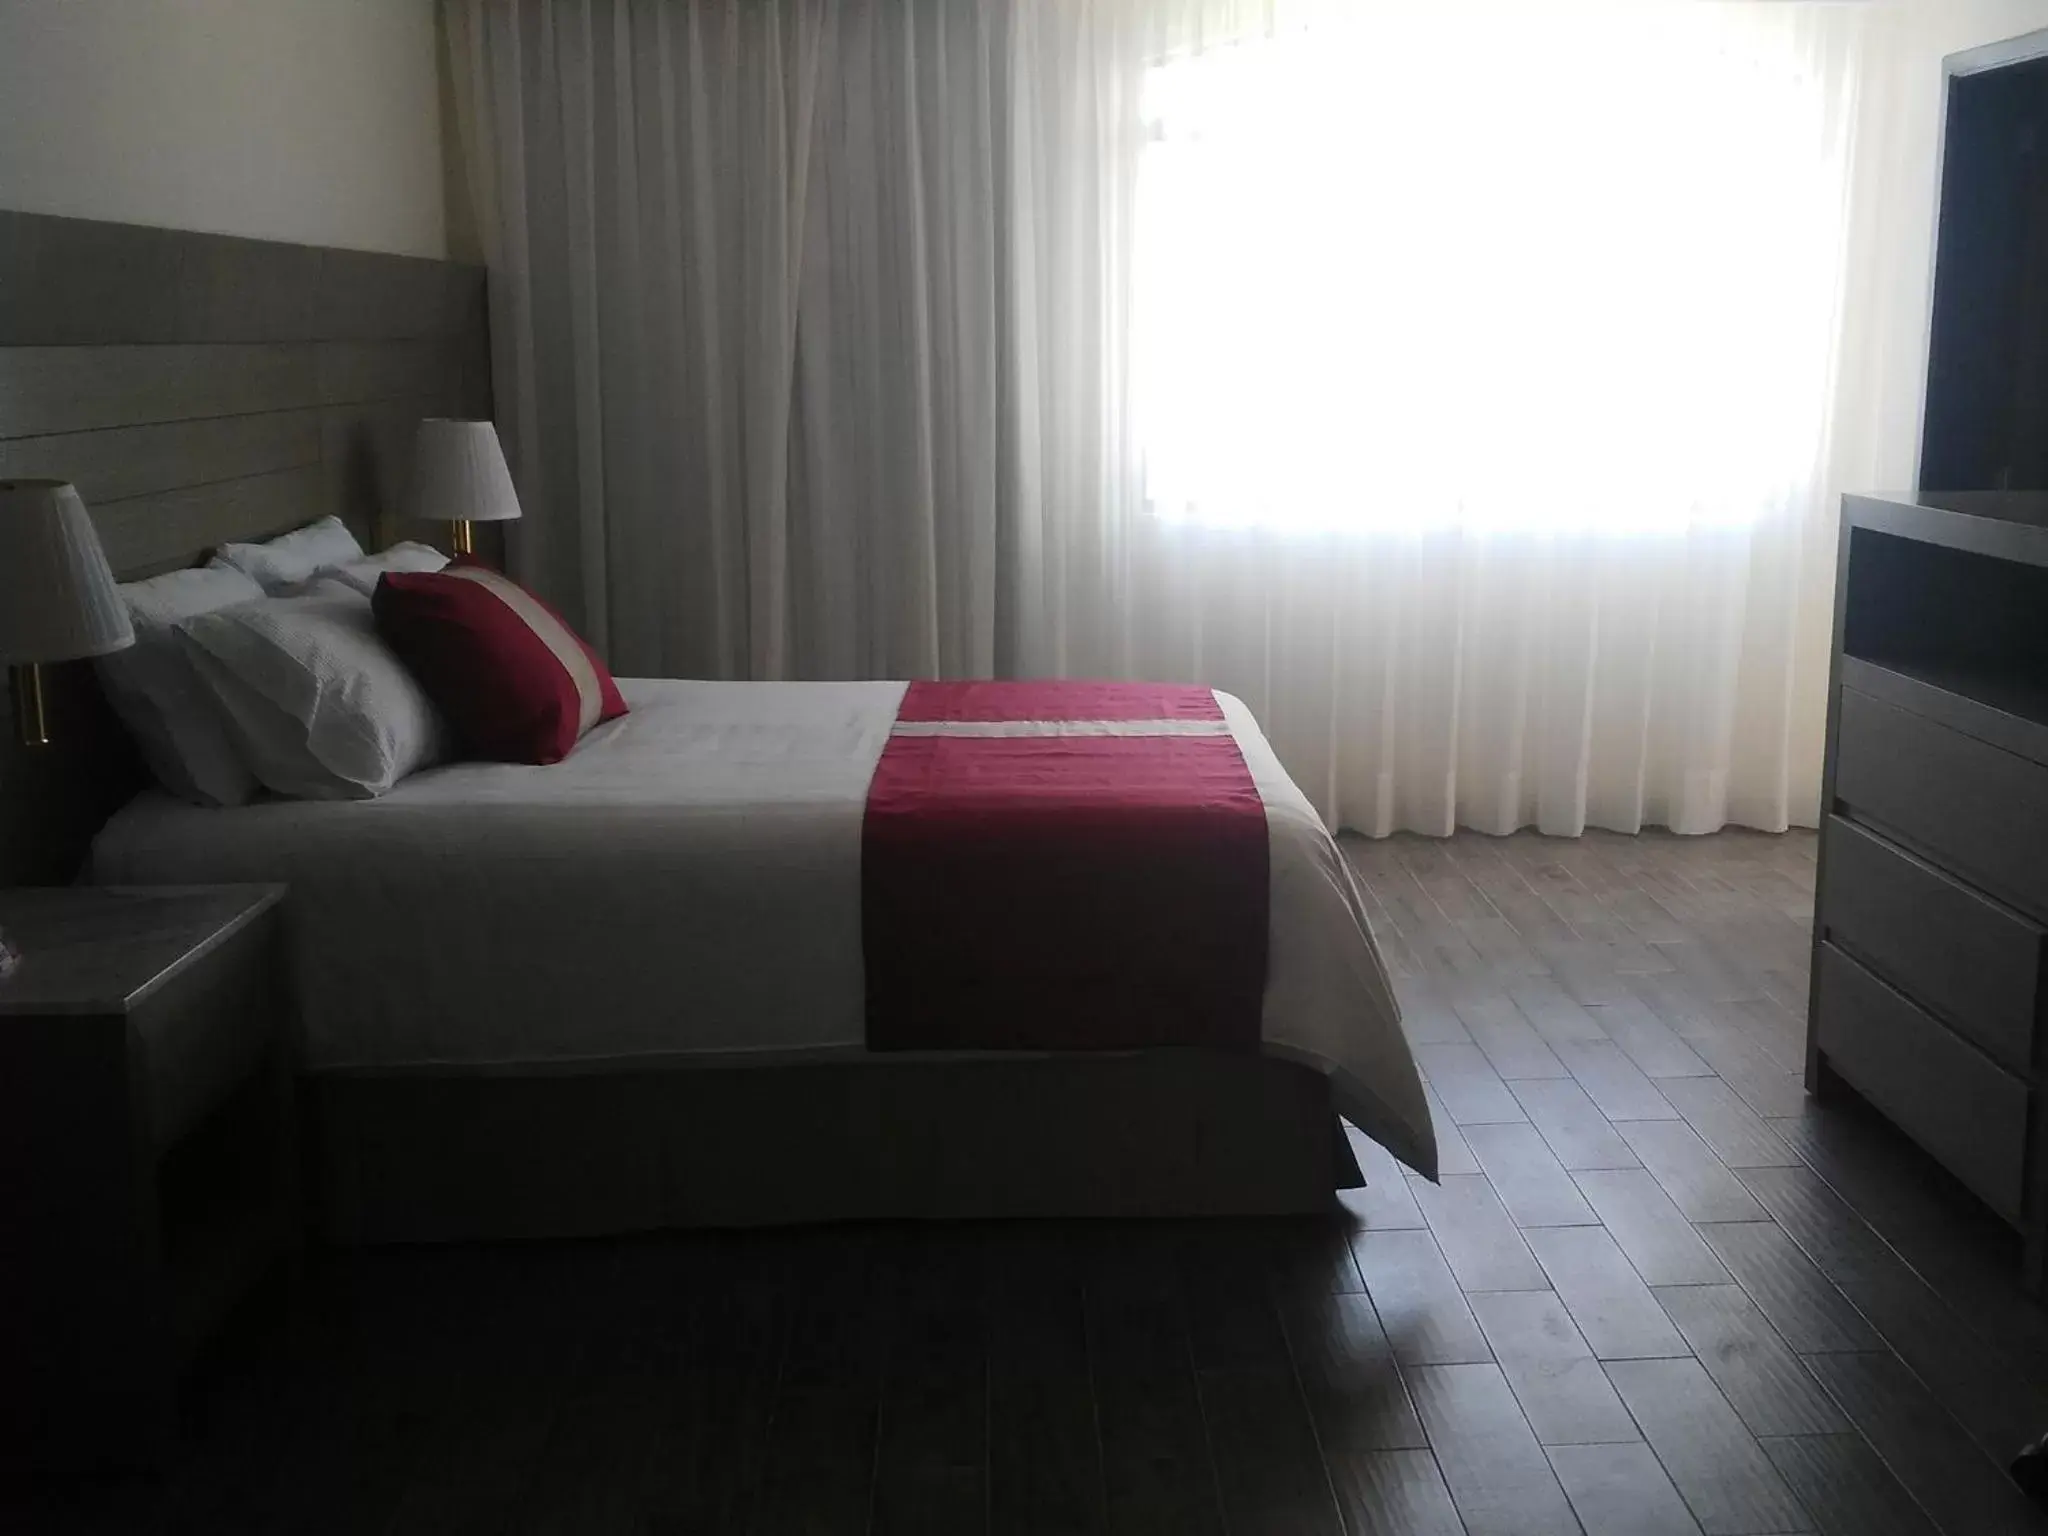 Bed, Room Photo in Hotel Mansur Business & Leisure